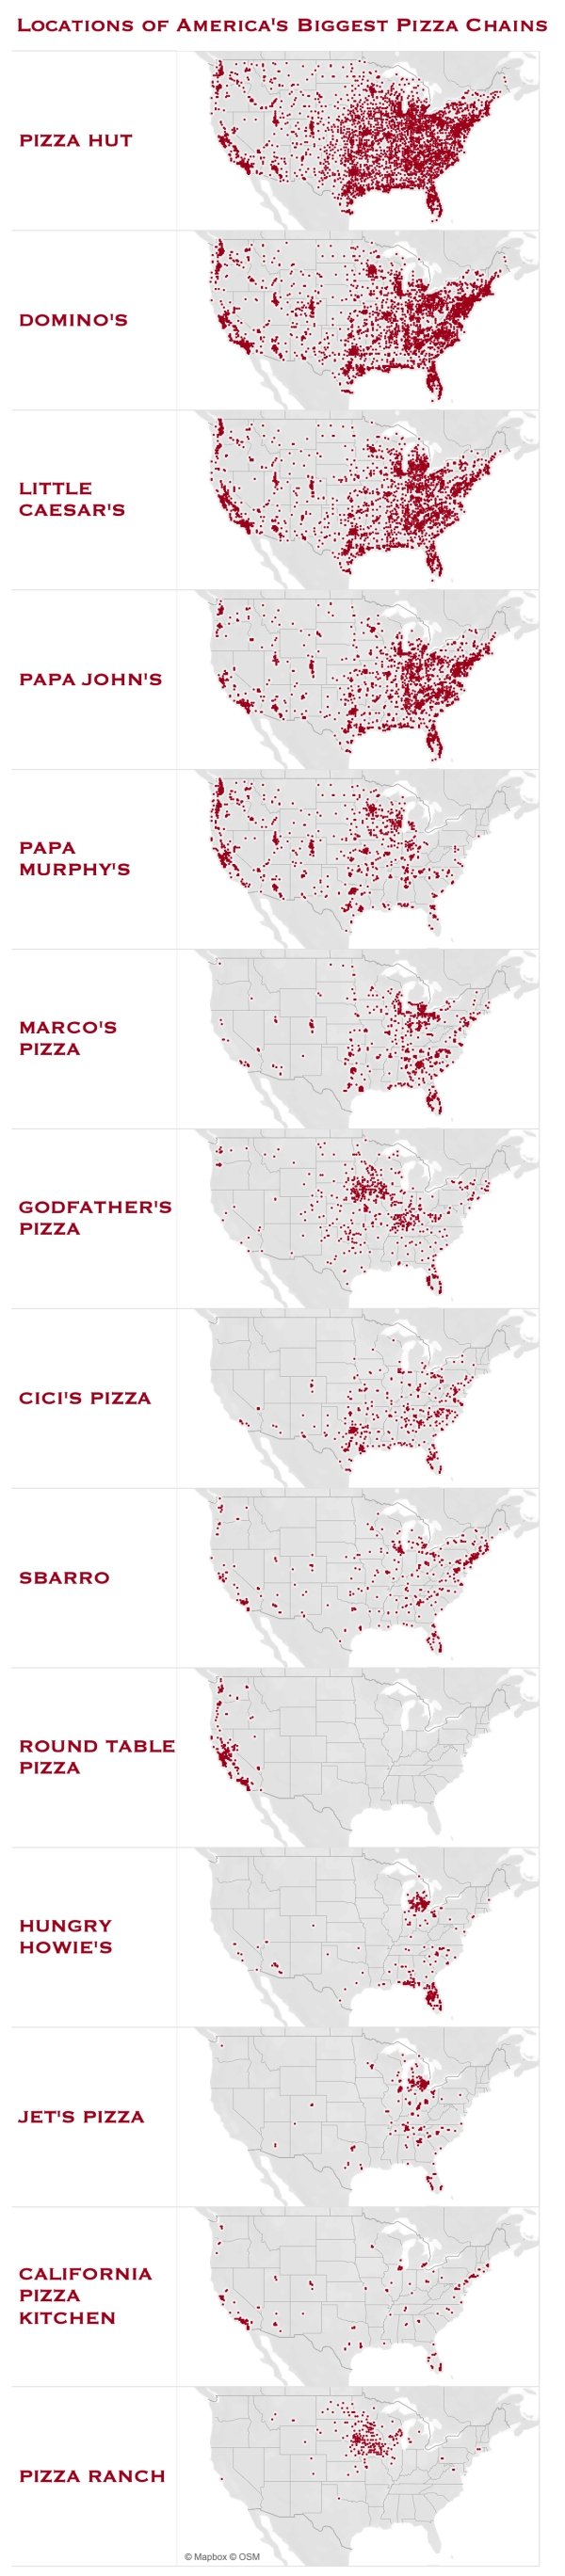 Locations Of America'S Biggest Pizza Chains Pizza Hut Domino'S Little Caesar'S Papa John'S Papa Murphy'S Marco'S Pizza Godfather'S Pizza Cici'S Pizza Sbarro Round Table Pizza Hungry Howie'S Jet'S Pizza California Pizza Kitchen Pizza